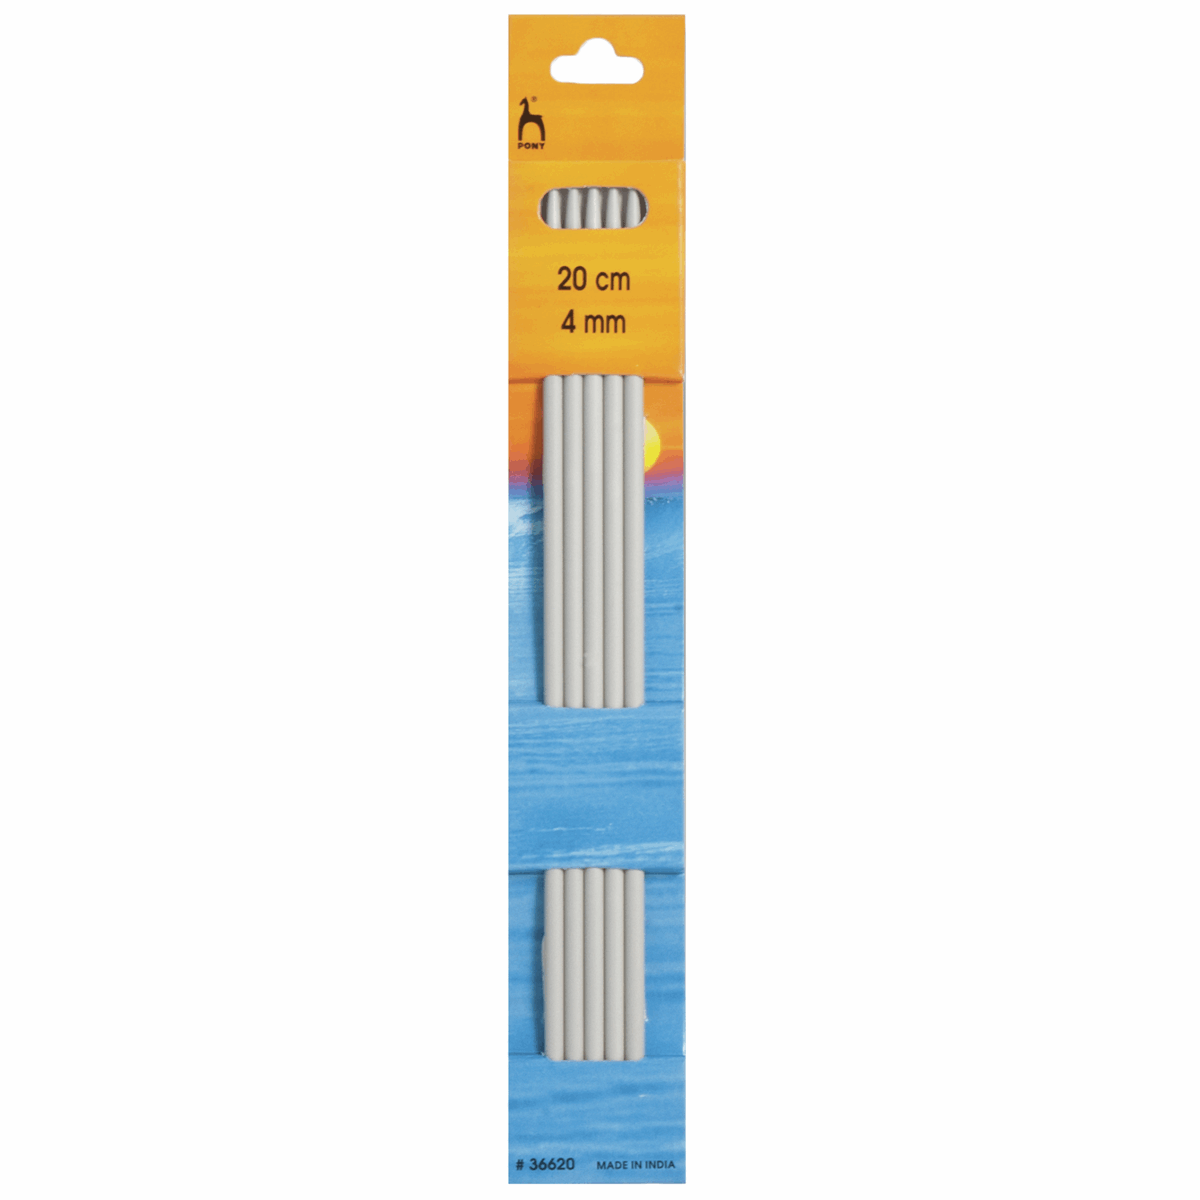 PONY Double-Ended Knitting Pins - 20cm x 4.00mm (Set of 5)